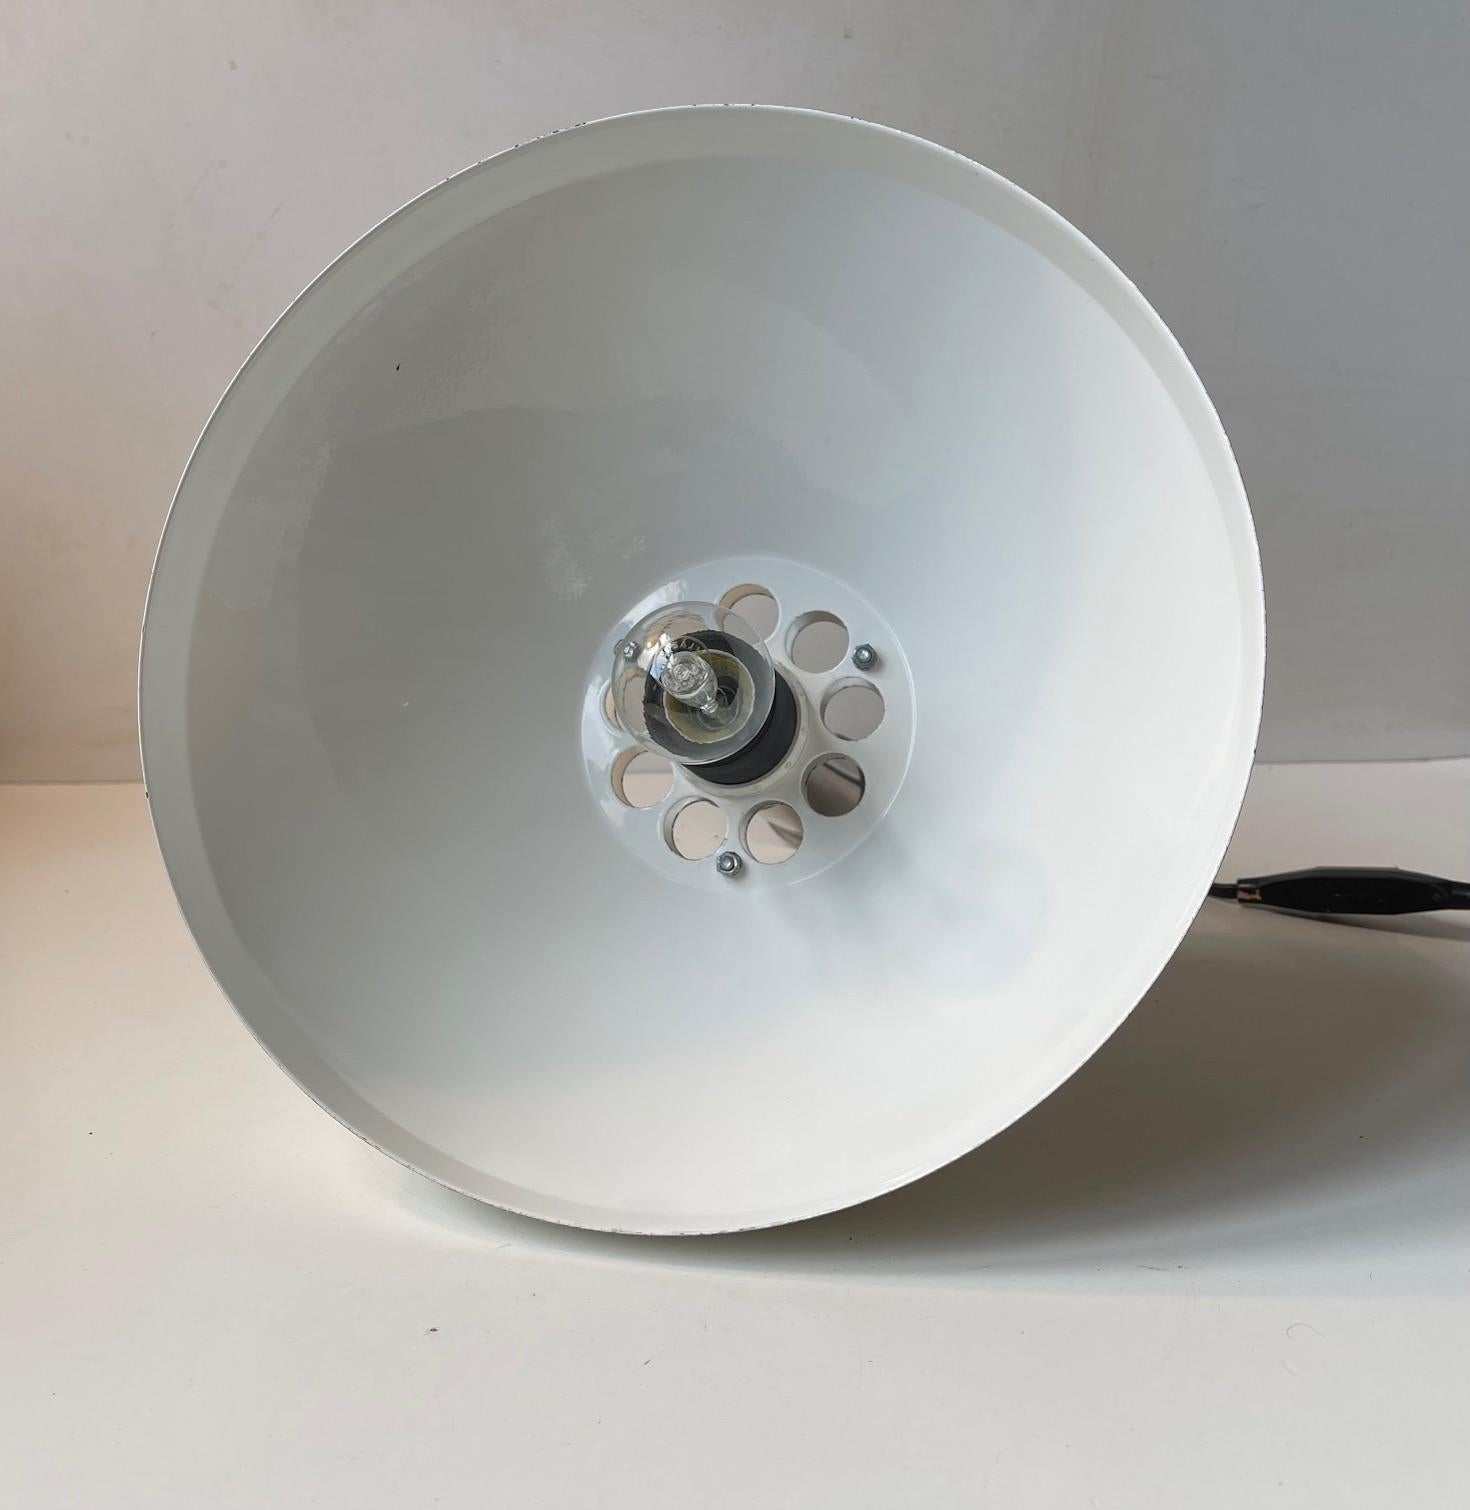 Italian Industrial Ceiling Lamp in White Enamel and Chrome Plating, 1970s For Sale 2